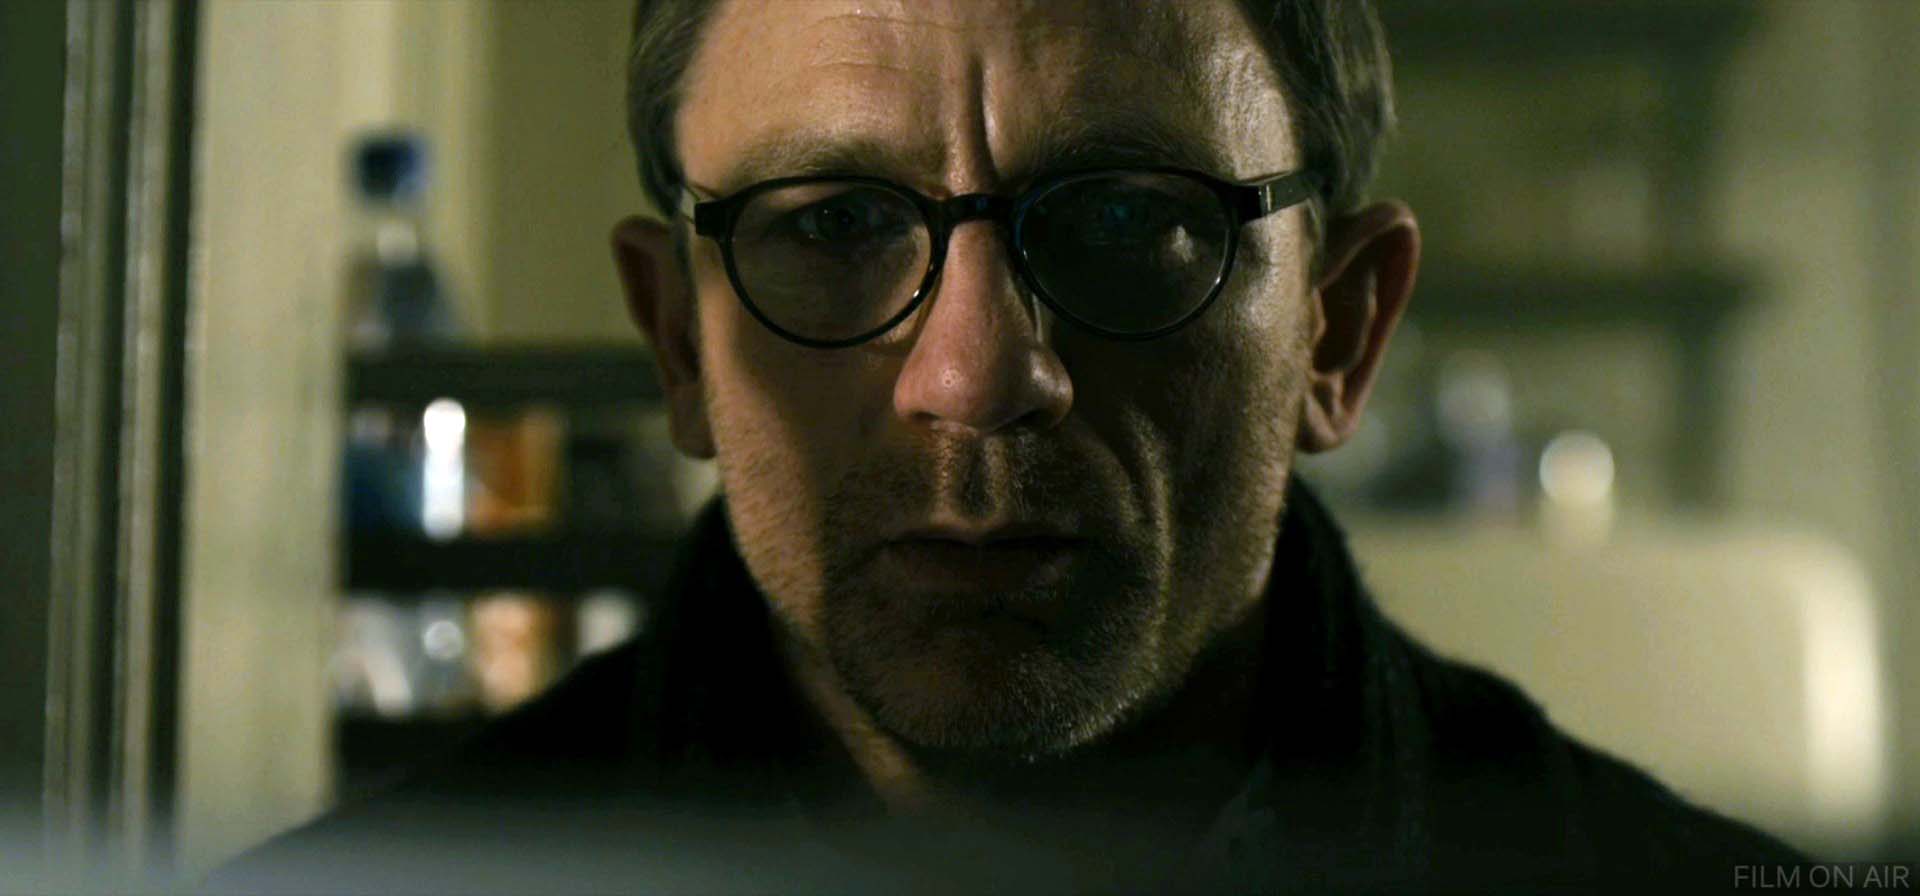 Glasses Closeup
 in The Girl with the Dragon Tattoo in The Girl with the Dragon Tattoo